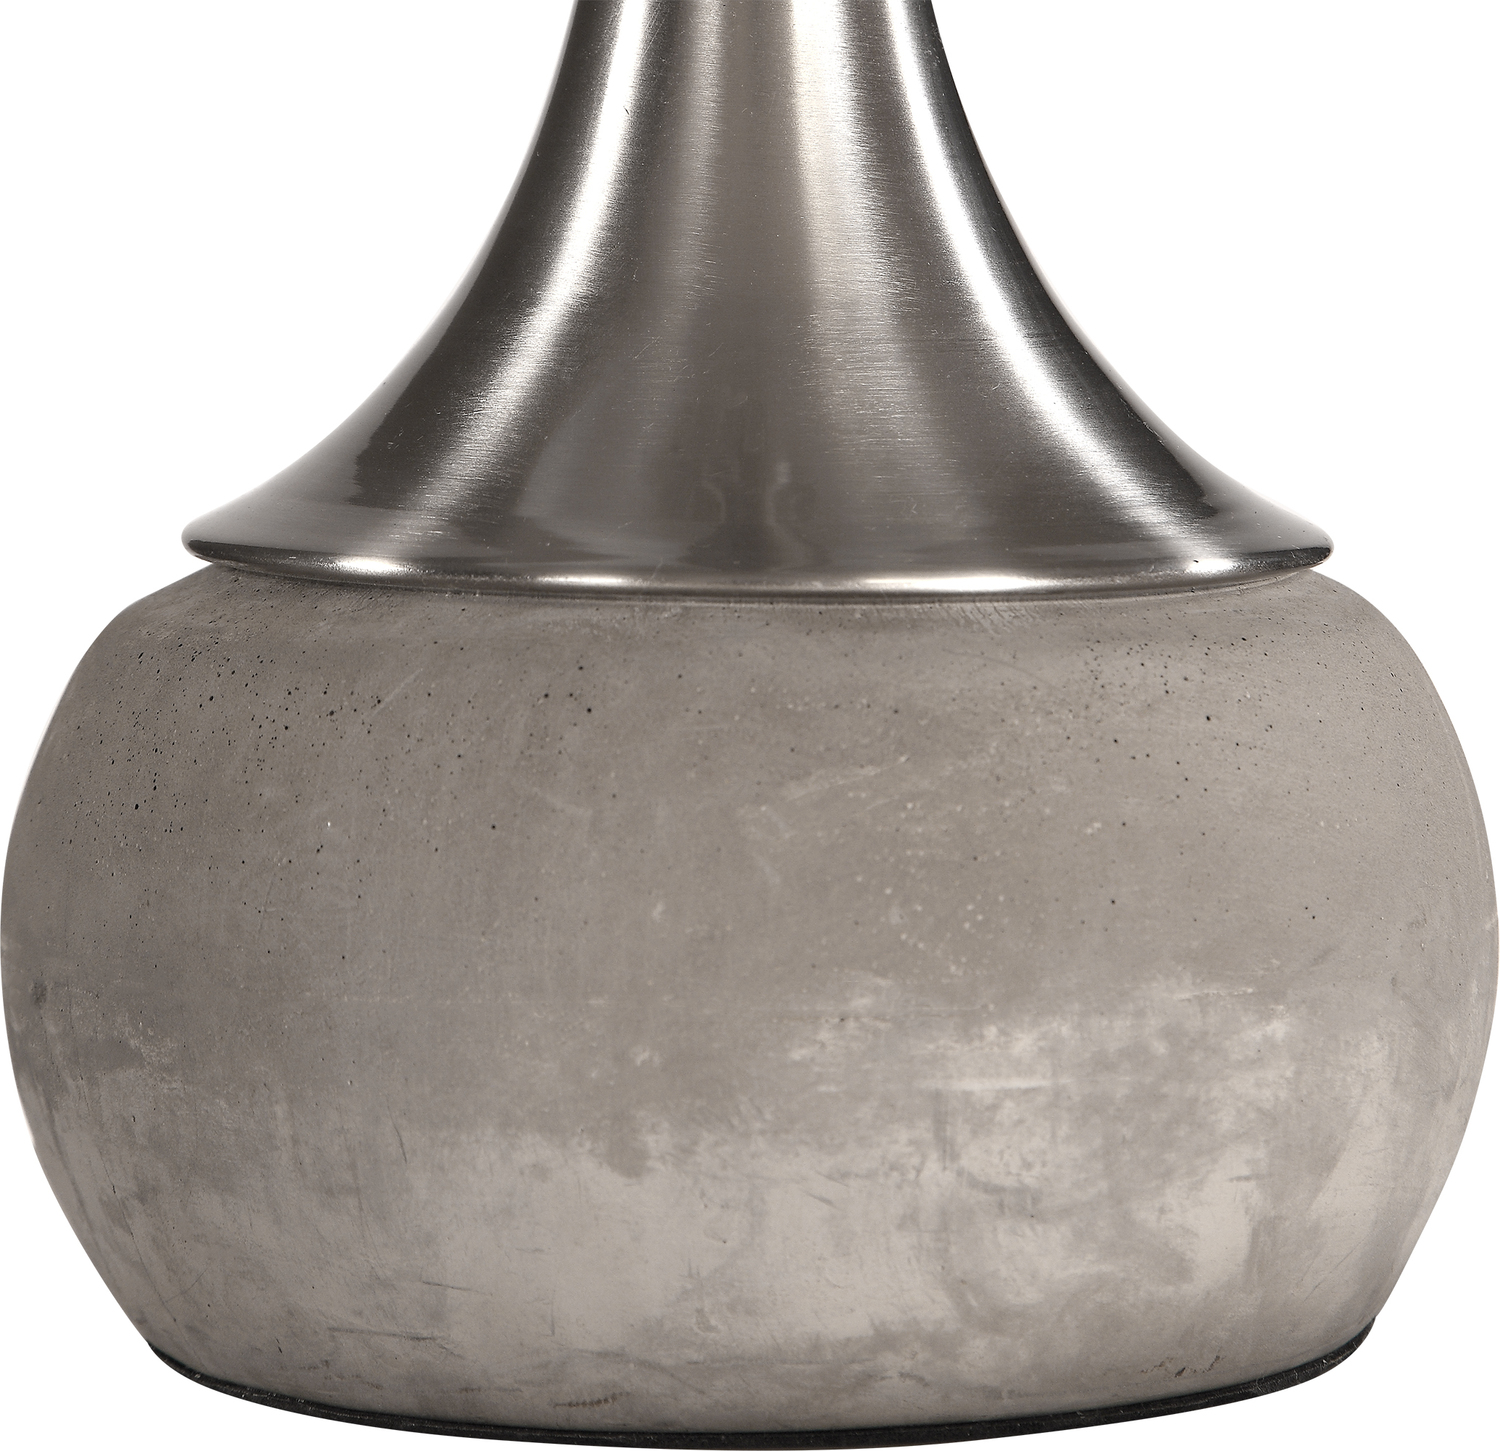 Uttermost Brushed Nickel Lamp Table Lamps This Sleek Spun Metal Base Features A Plated Brushed Nickel Finish, Displayed On A Smoothed Natural Concrete Foot.